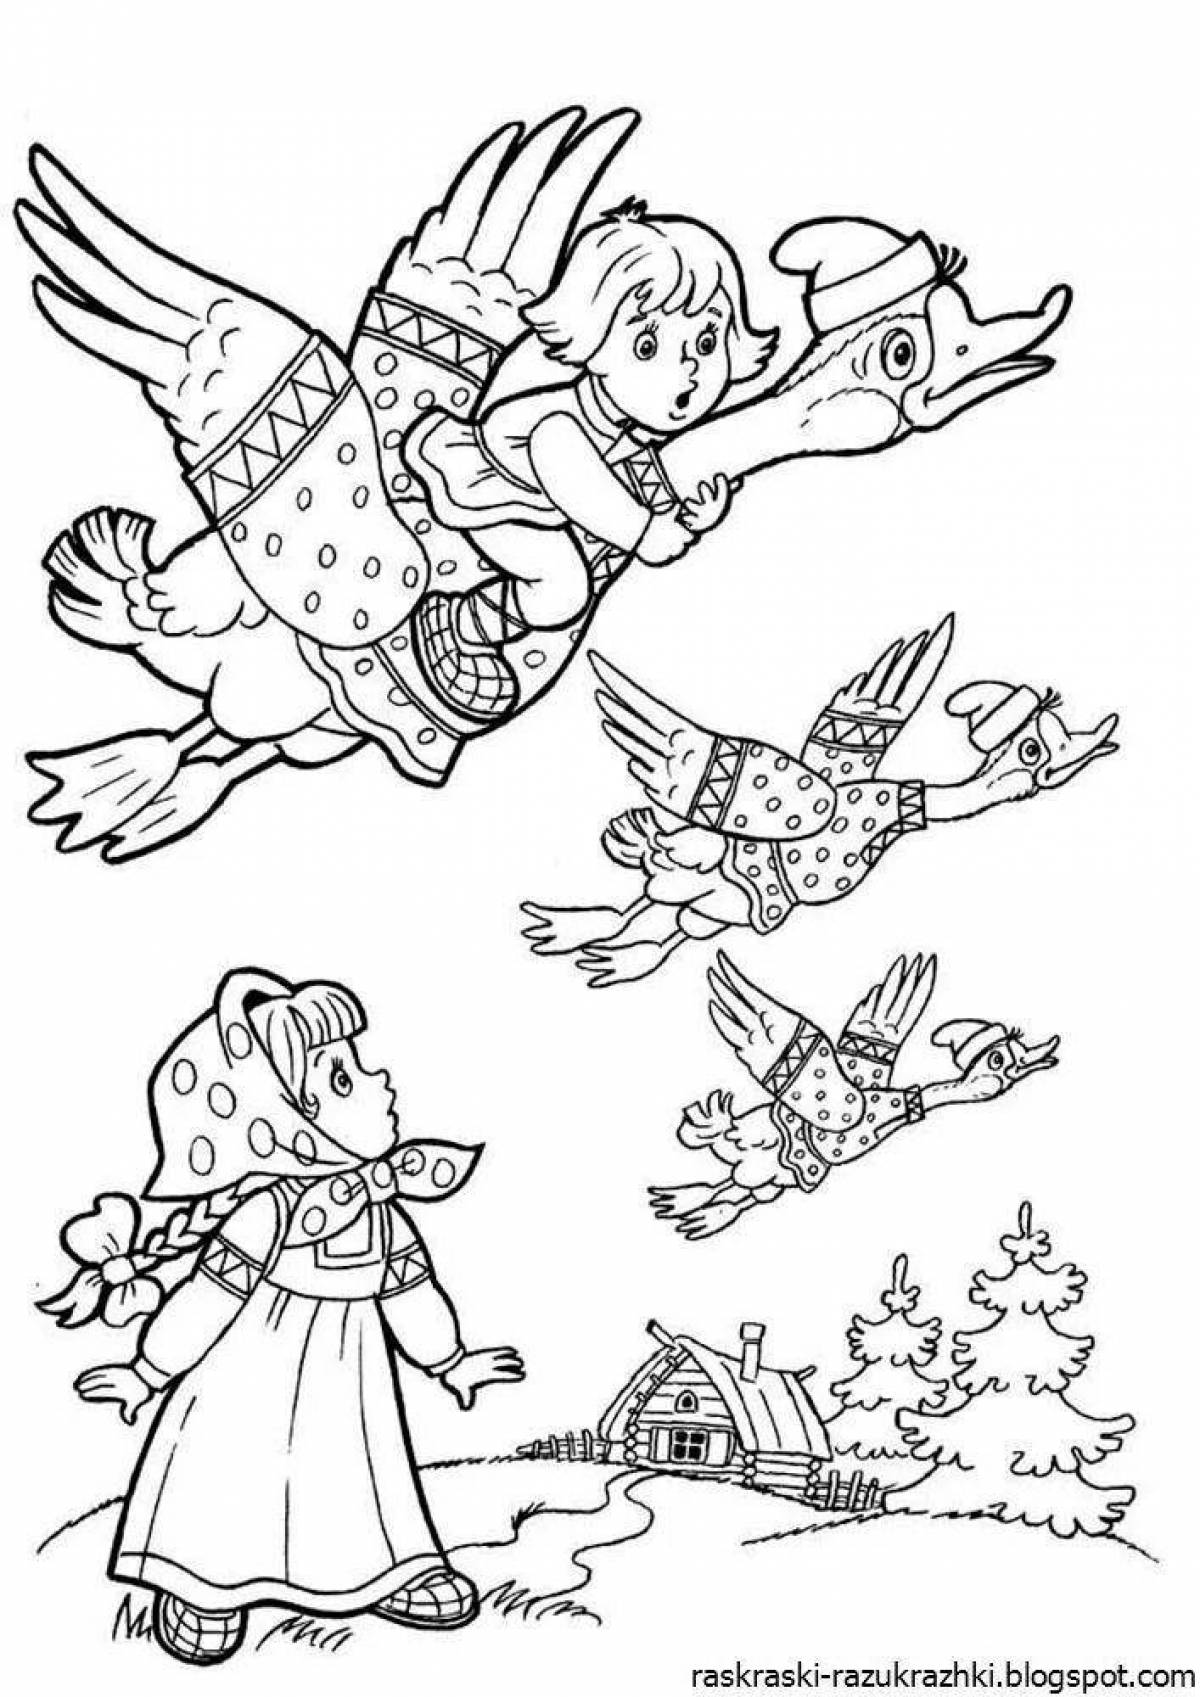 Coloring Russian fairy tales